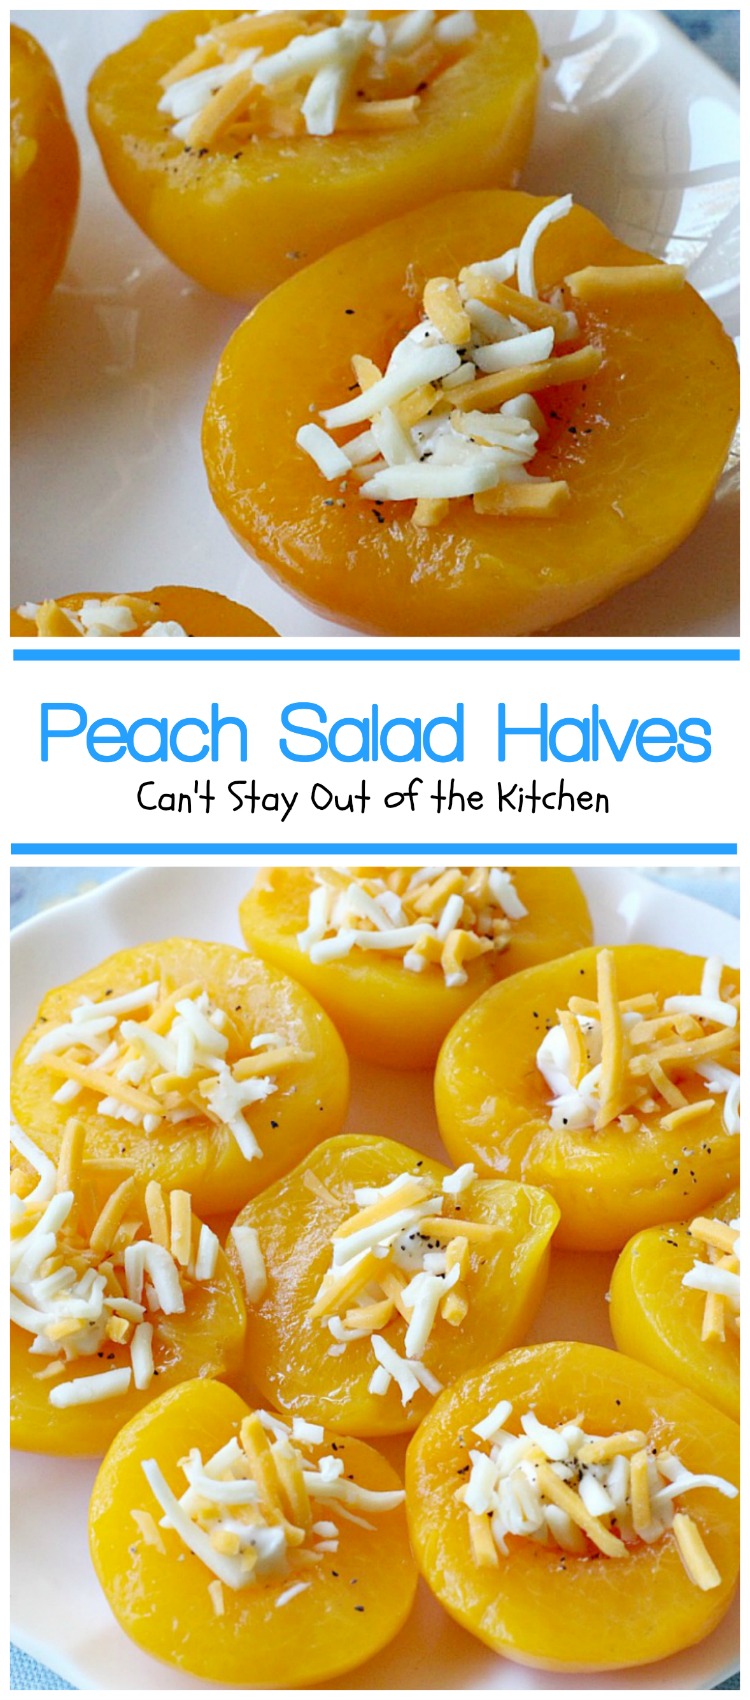 Peach Salad Halves | Can't Stay Out of the Kitchen